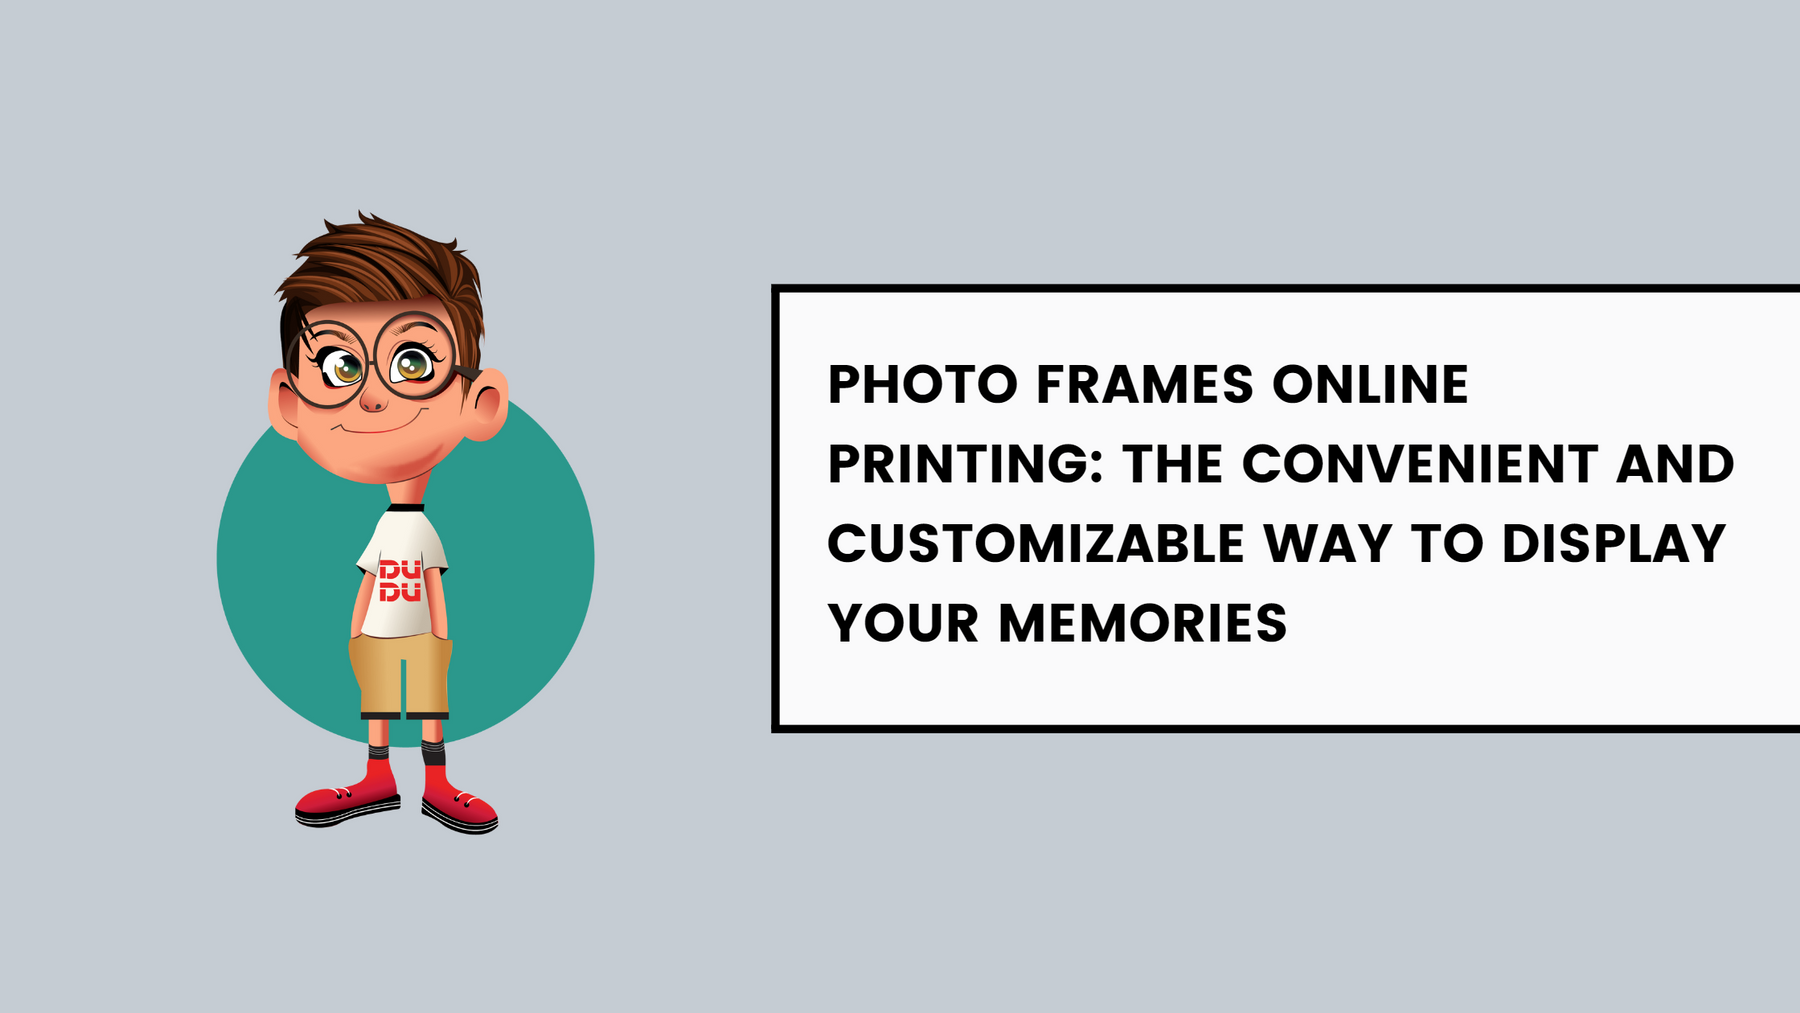 Photo Frames Online Printing: The Convenient and Customizable Way to Display Your Memories